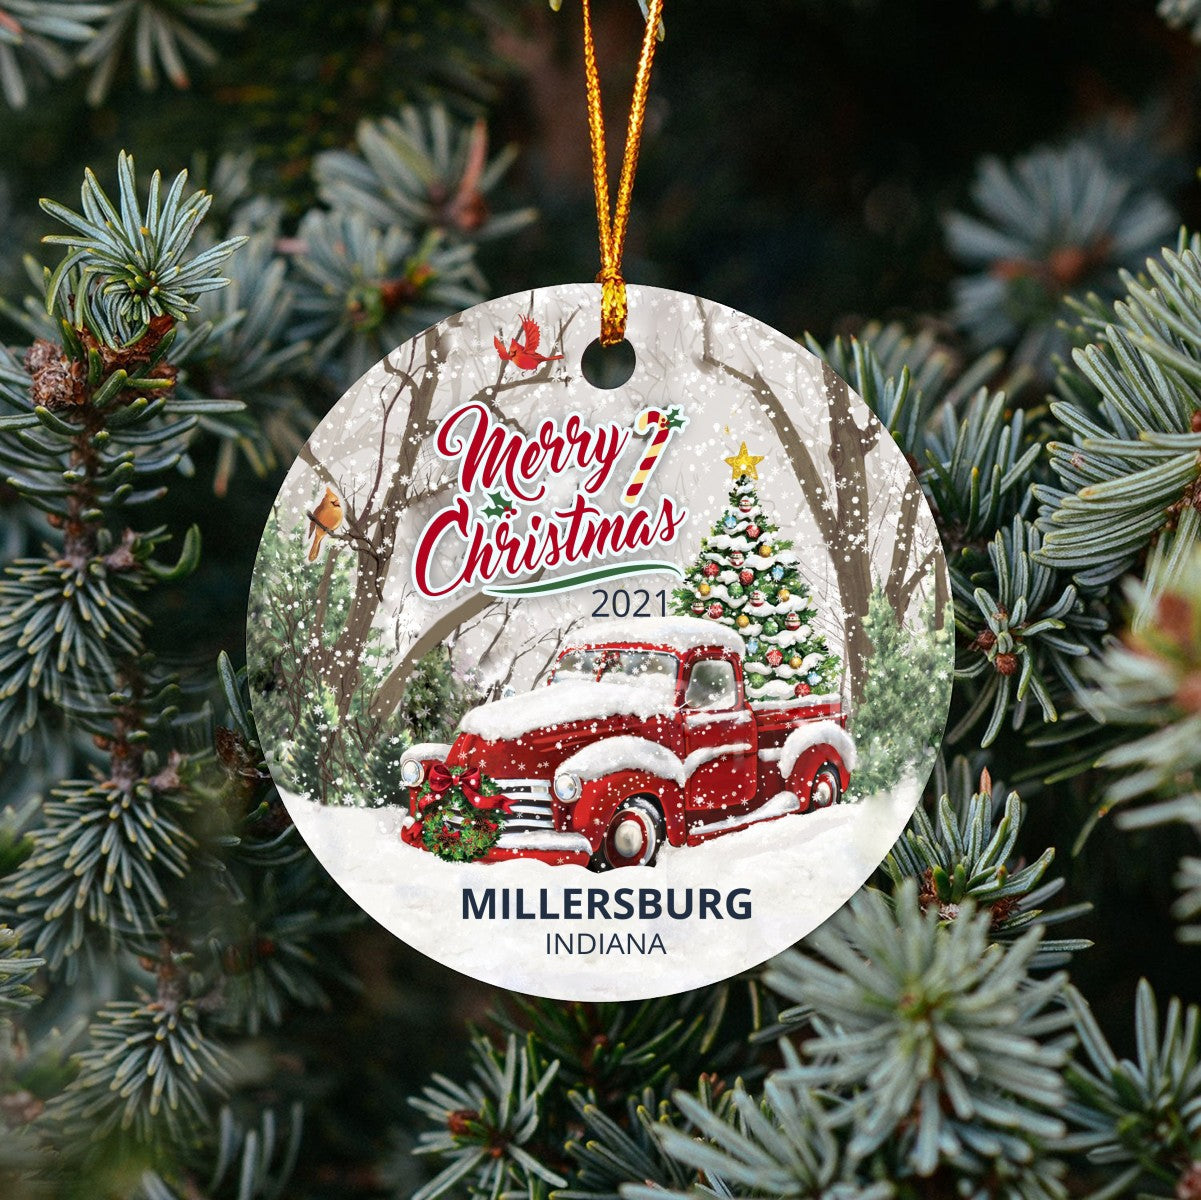 Christmas Tree Ornaments Millersburg - Ornament With Name City, State Millersburg Indiana IN Ornament - Red Truck Xmas Ornaments 3'' Plastic Gift For Family, Friend And Housewarming